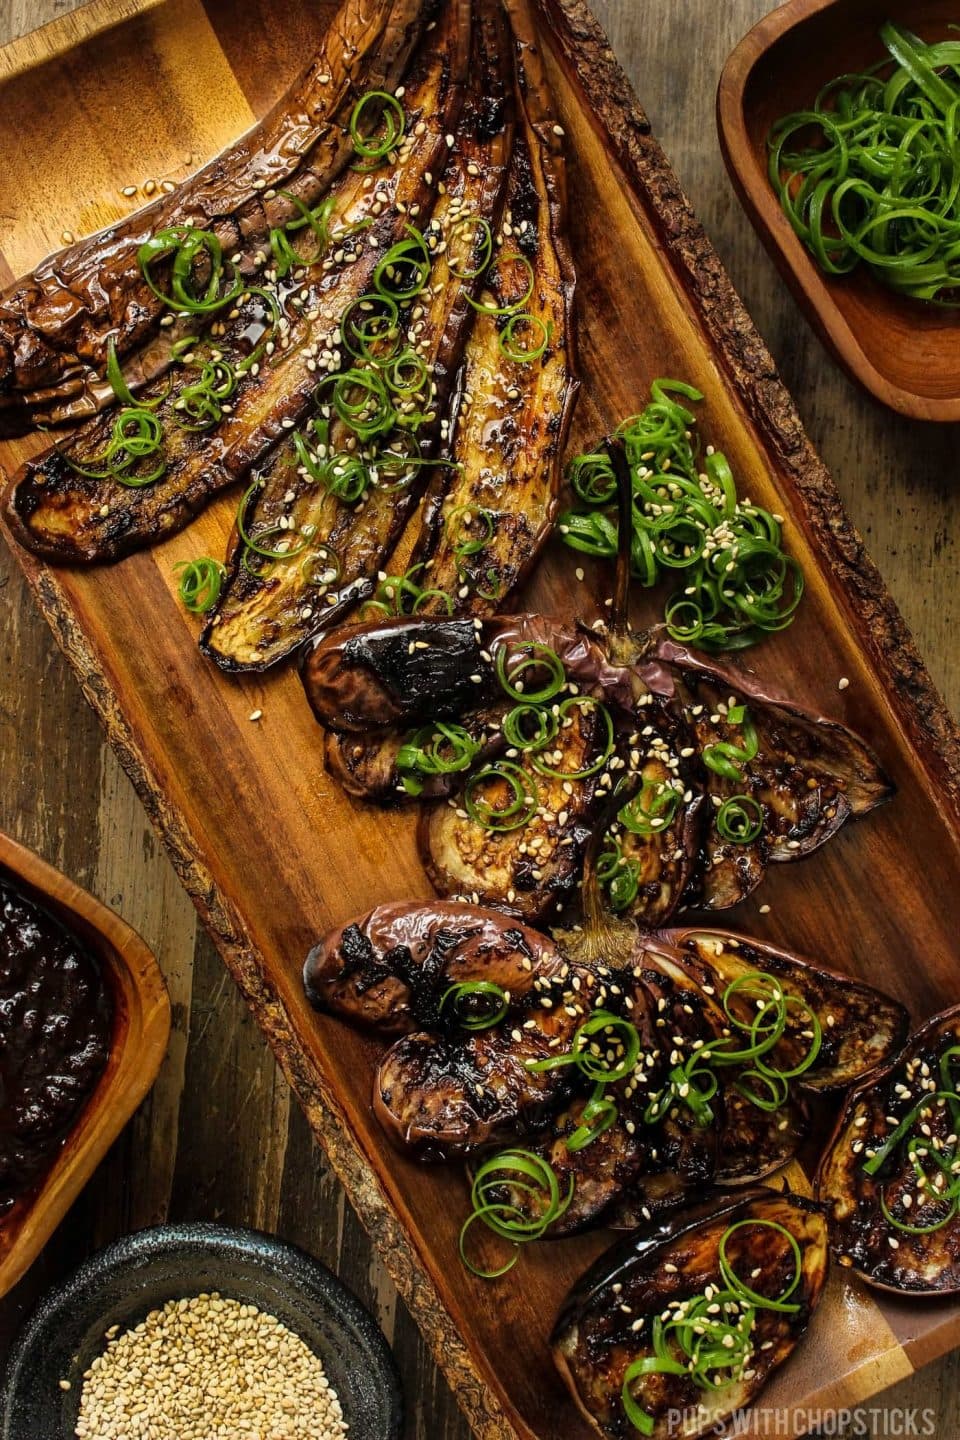 Miso eggplant fanned out on a wooden plate and served with sesame seeds and green onions